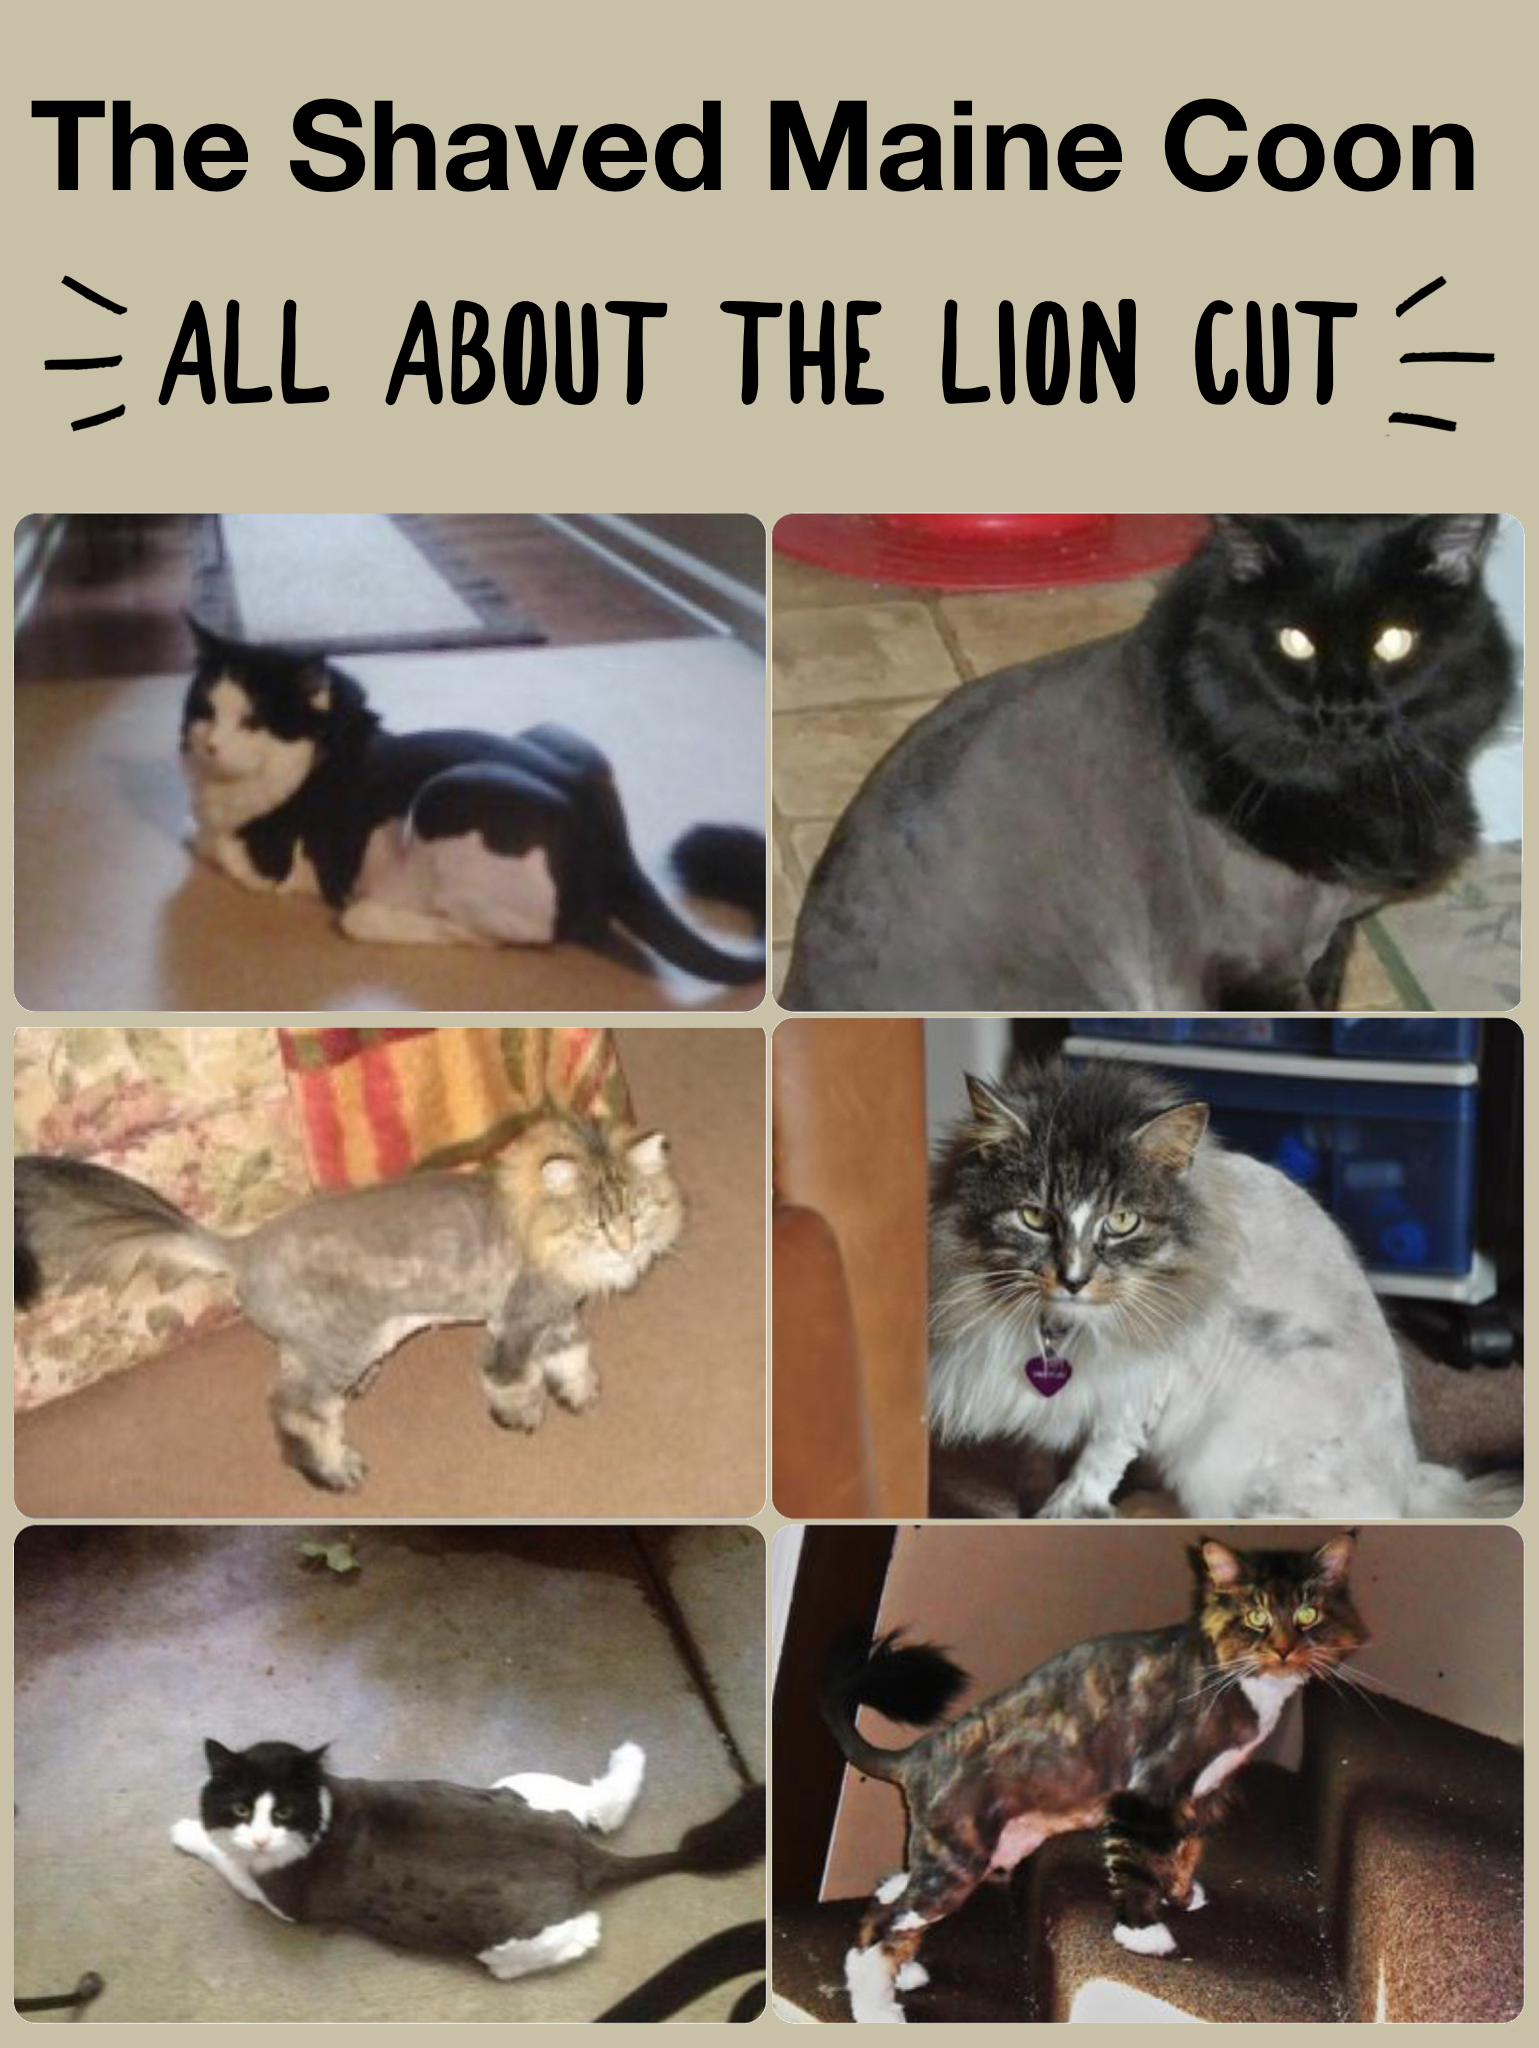 shaved maine coon cats with lion cuts